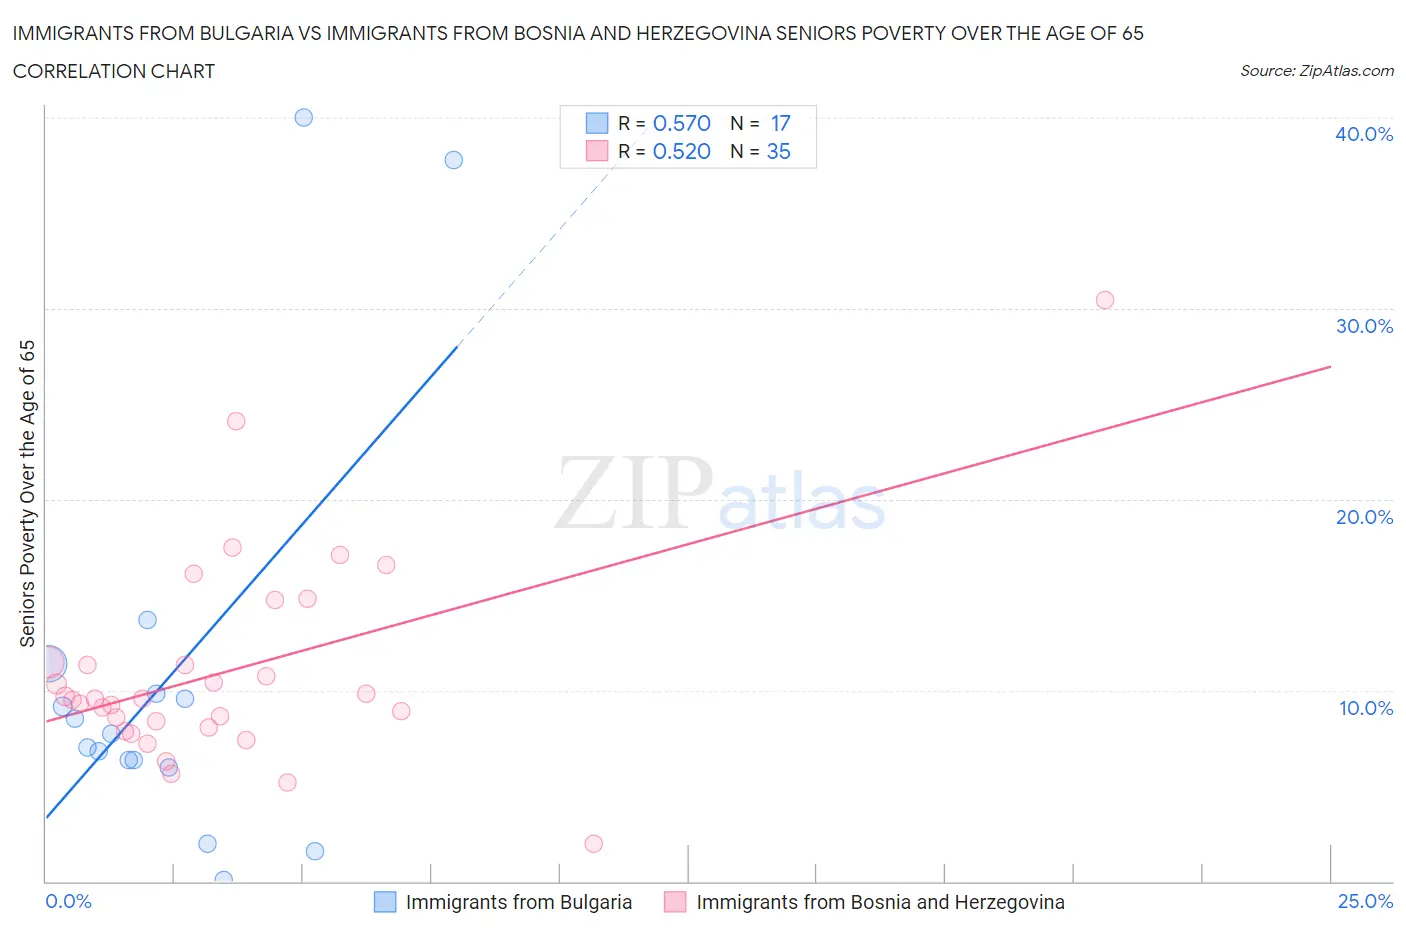 Immigrants from Bulgaria vs Immigrants from Bosnia and Herzegovina Seniors Poverty Over the Age of 65